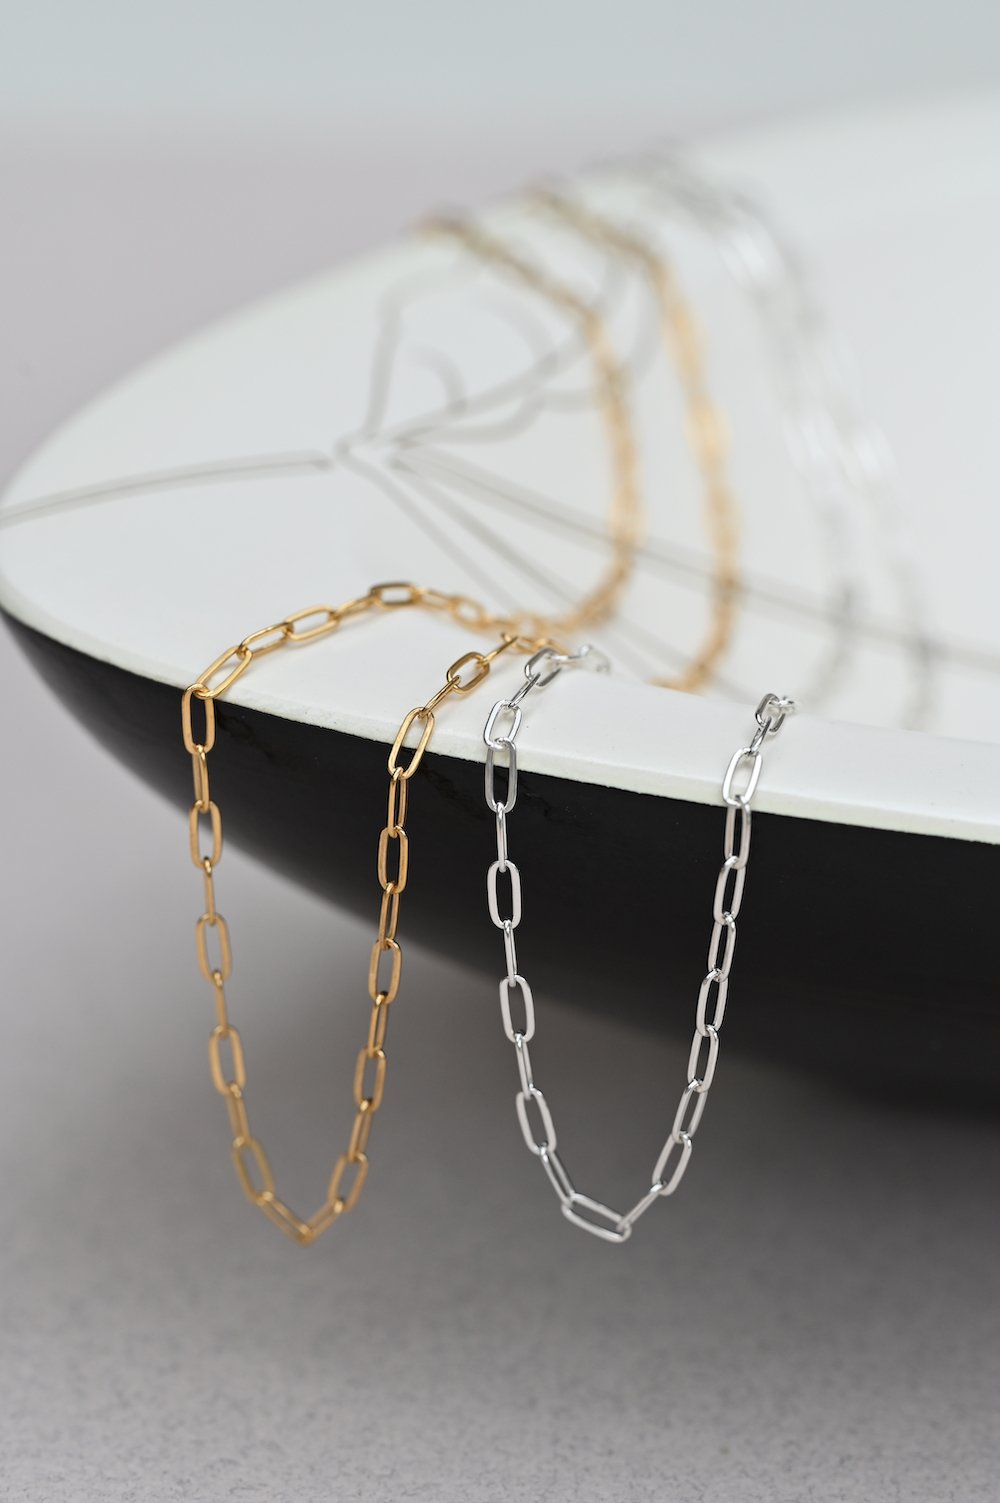 Paperclip Chain,necklace, chain, sterling silver chain, gold vermeil, gold vermeil chain, chain for layering, layering chain, sterling silver, sterling silver necklace, gold vermeil necklace, Paperclip